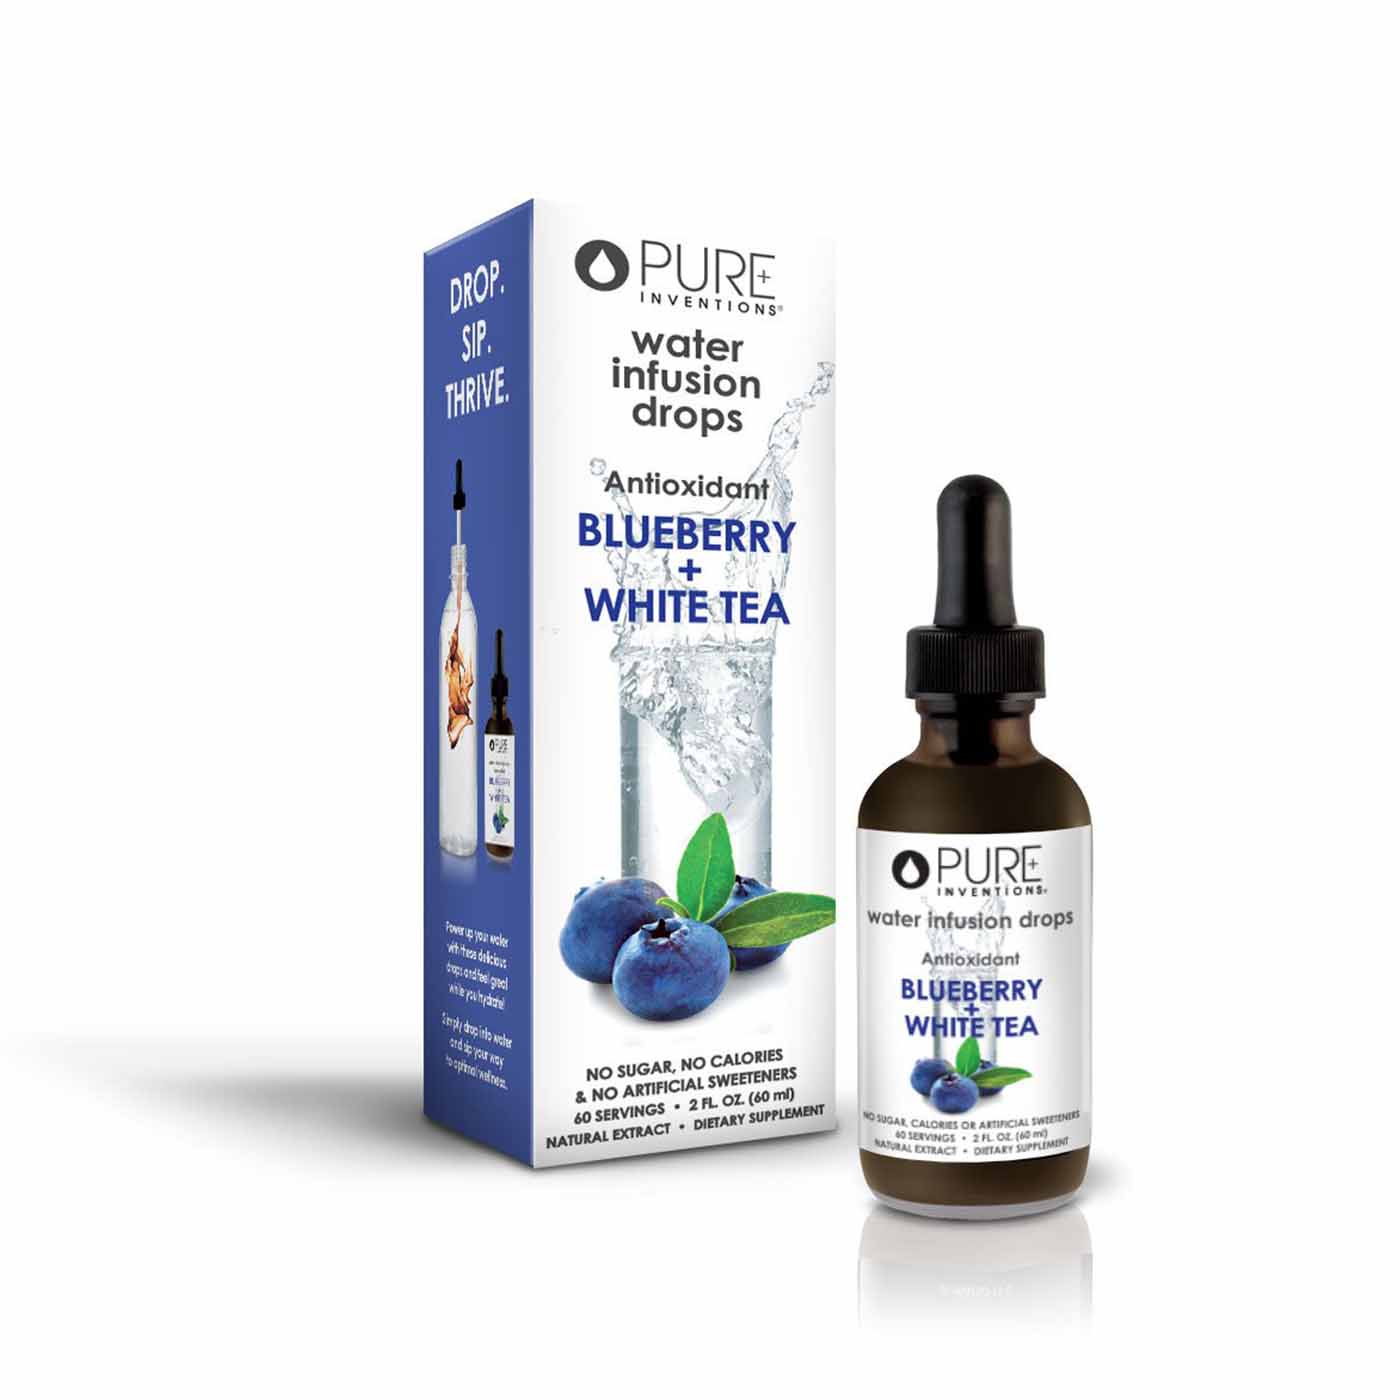 Super Fruit Extracts Water Infusion Drops - Blueberry + White Tea | Pure Inventions